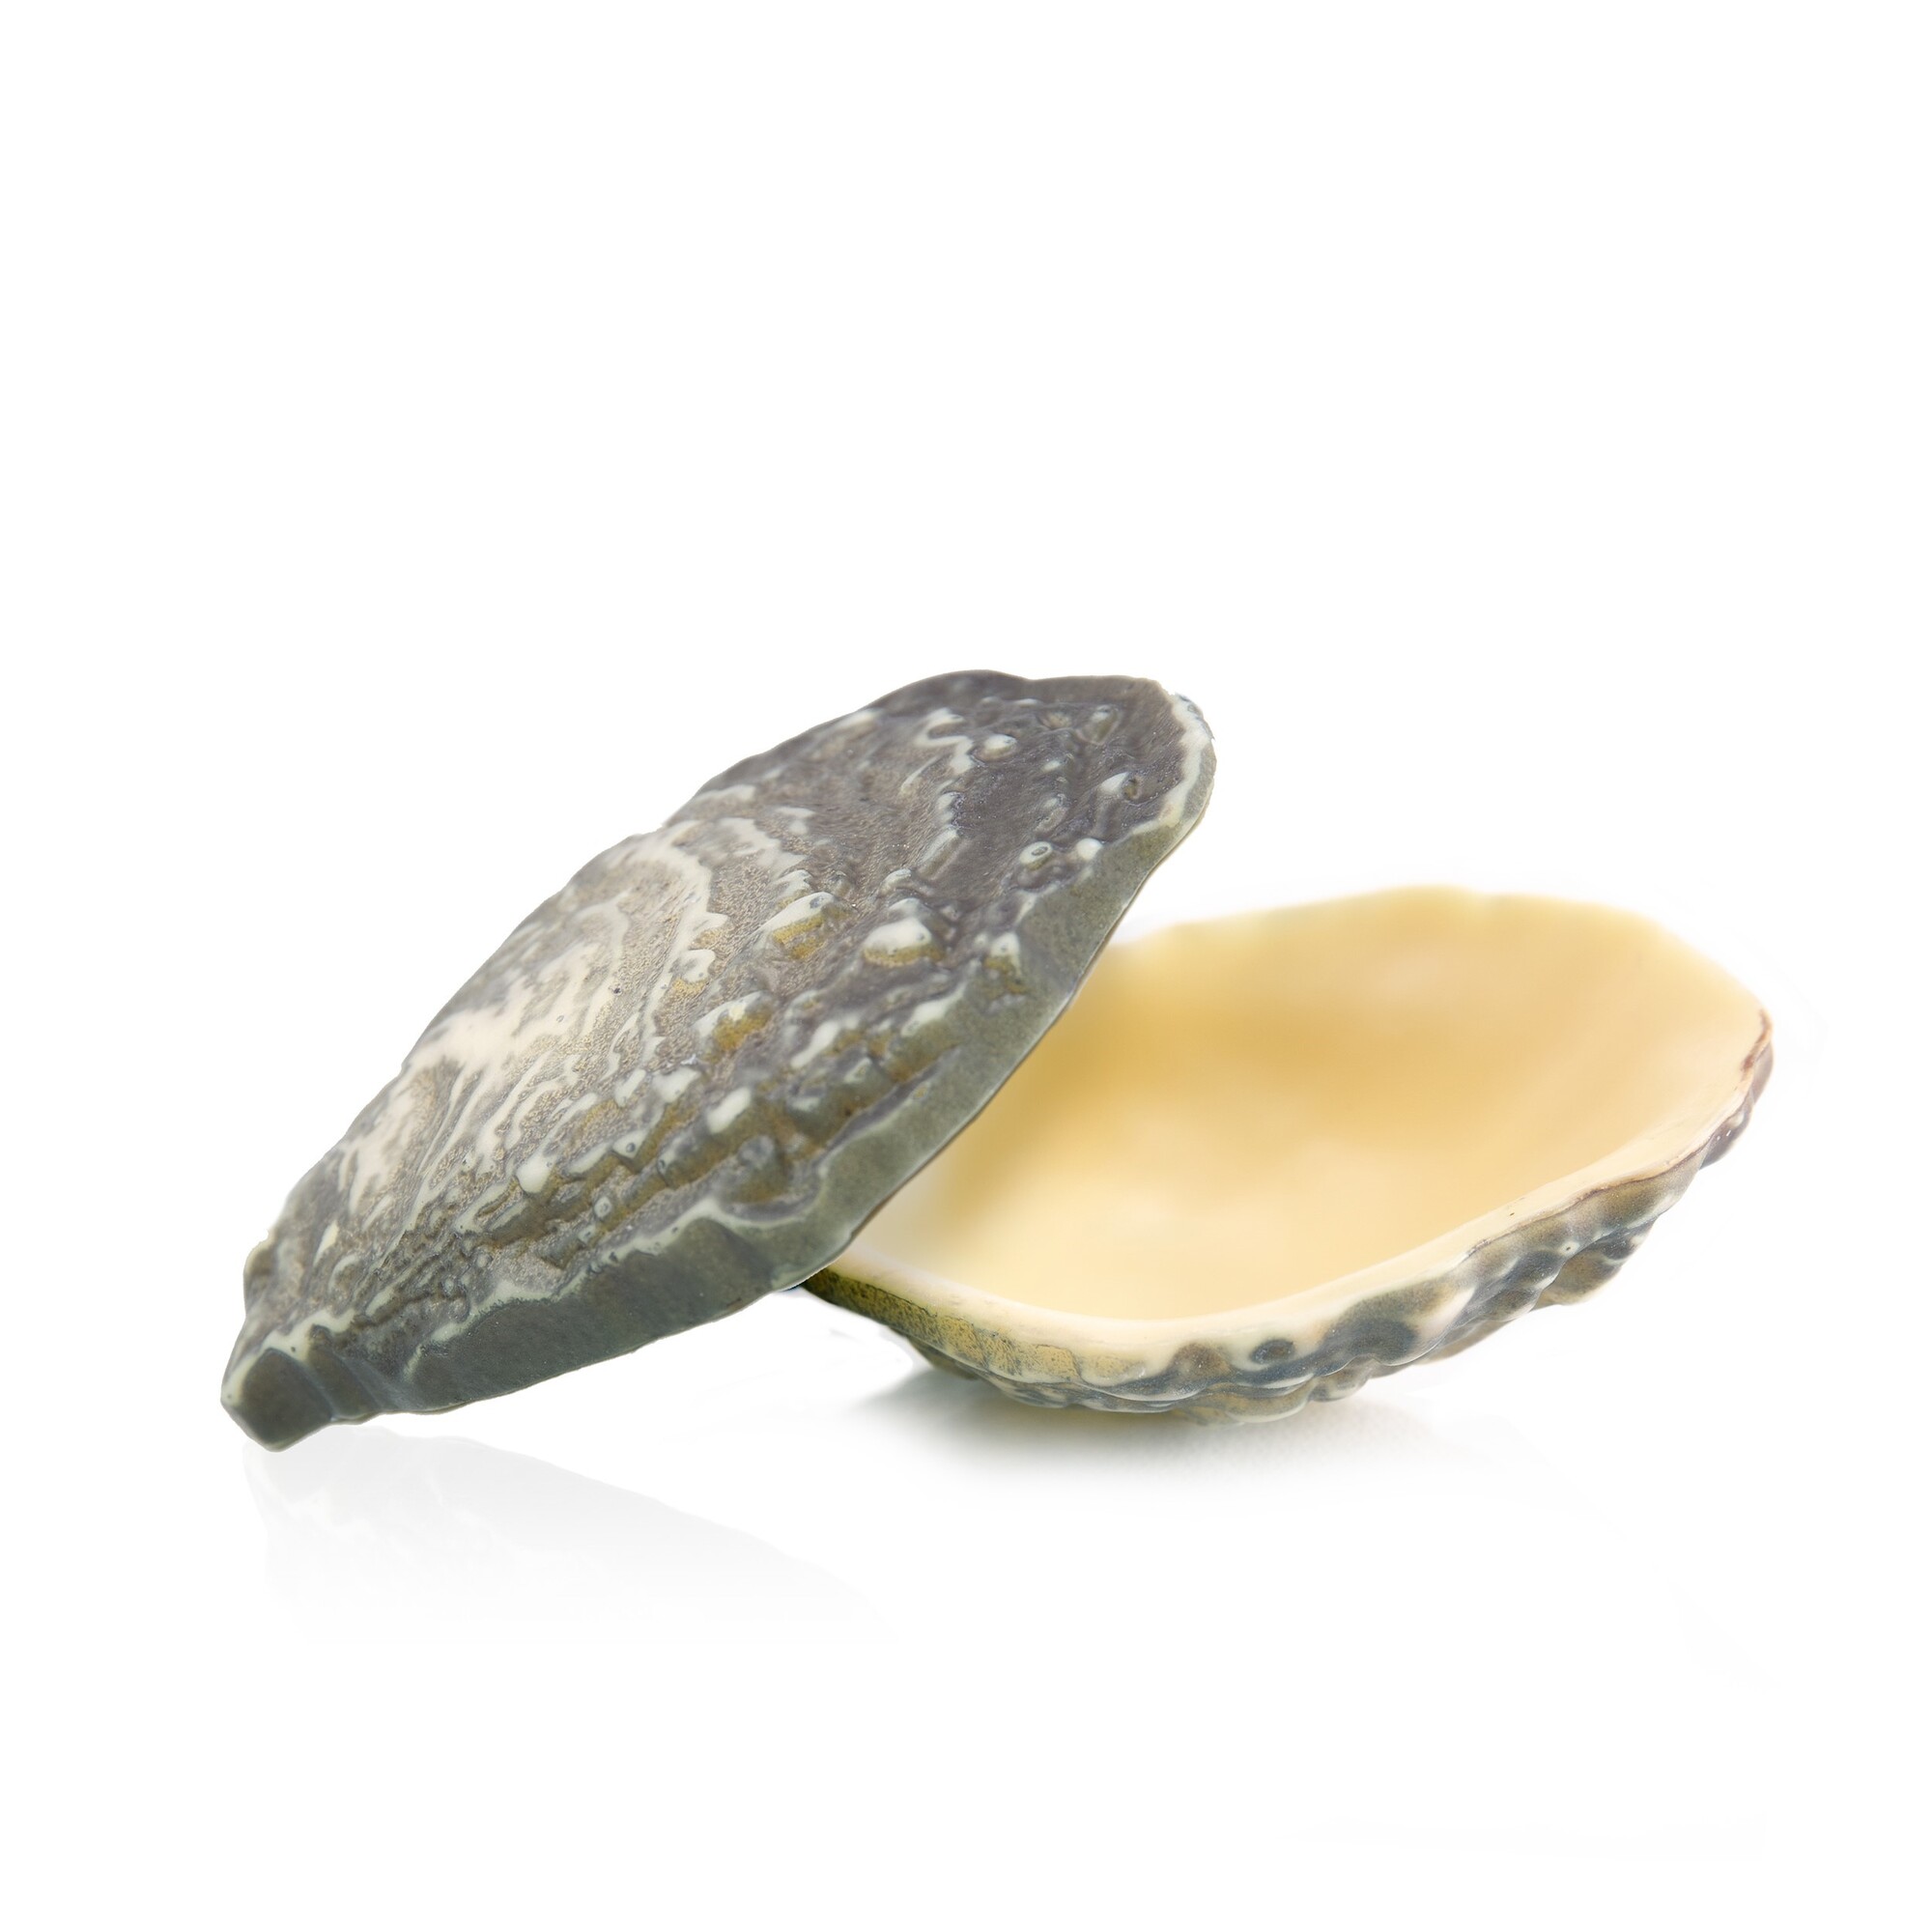 71765 Chocolade oesters 12 st